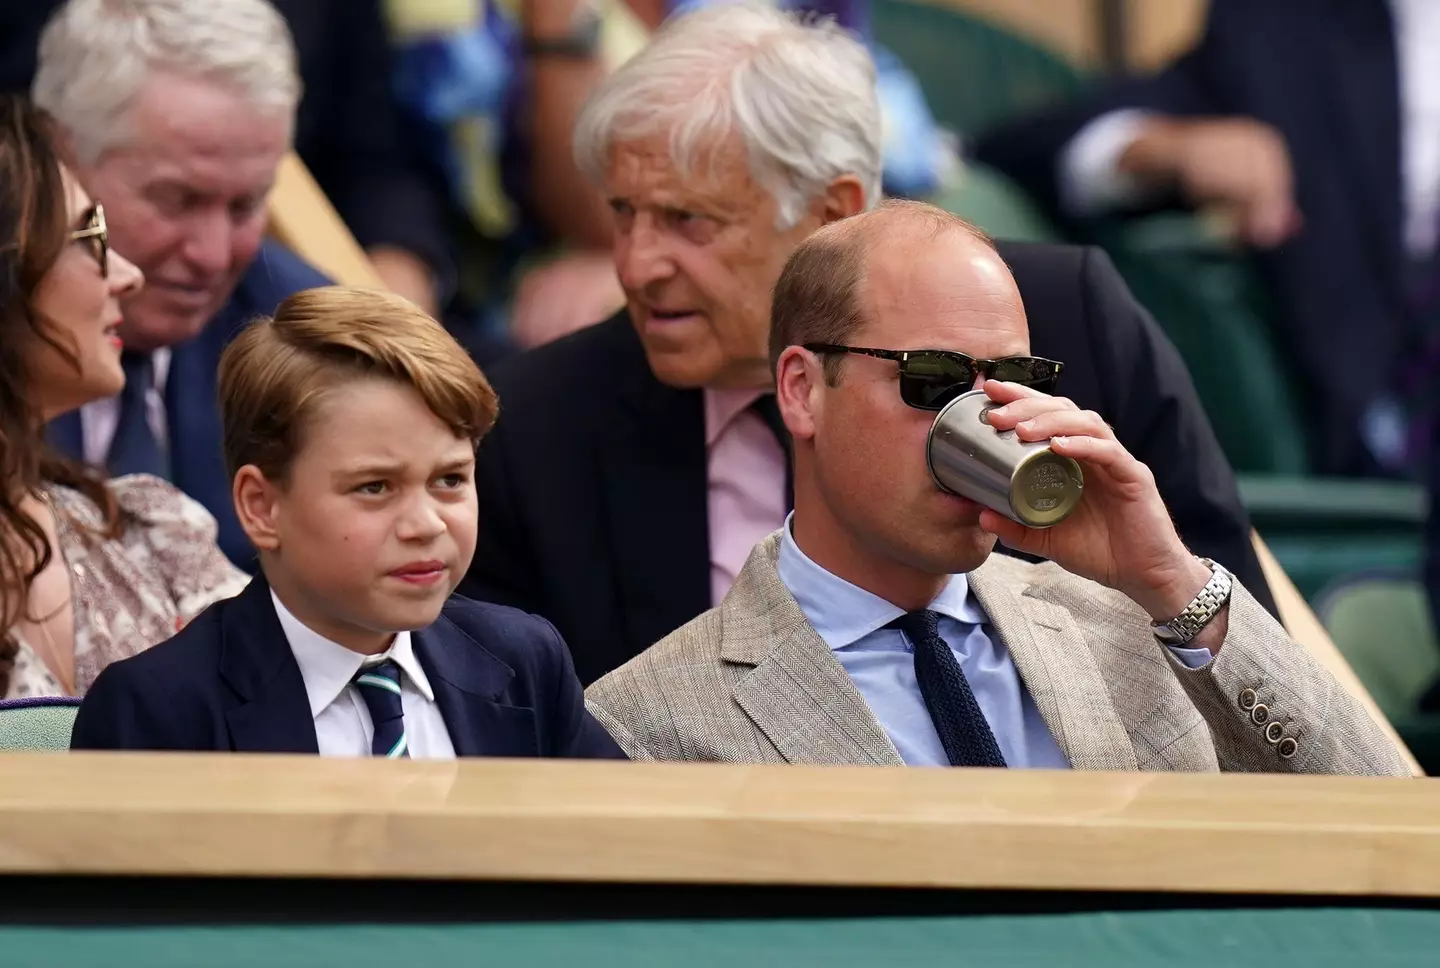 The Royal Family have faced backlash after Prince George was spotted wearing a suit at Wimbledon in 30 degree heat.